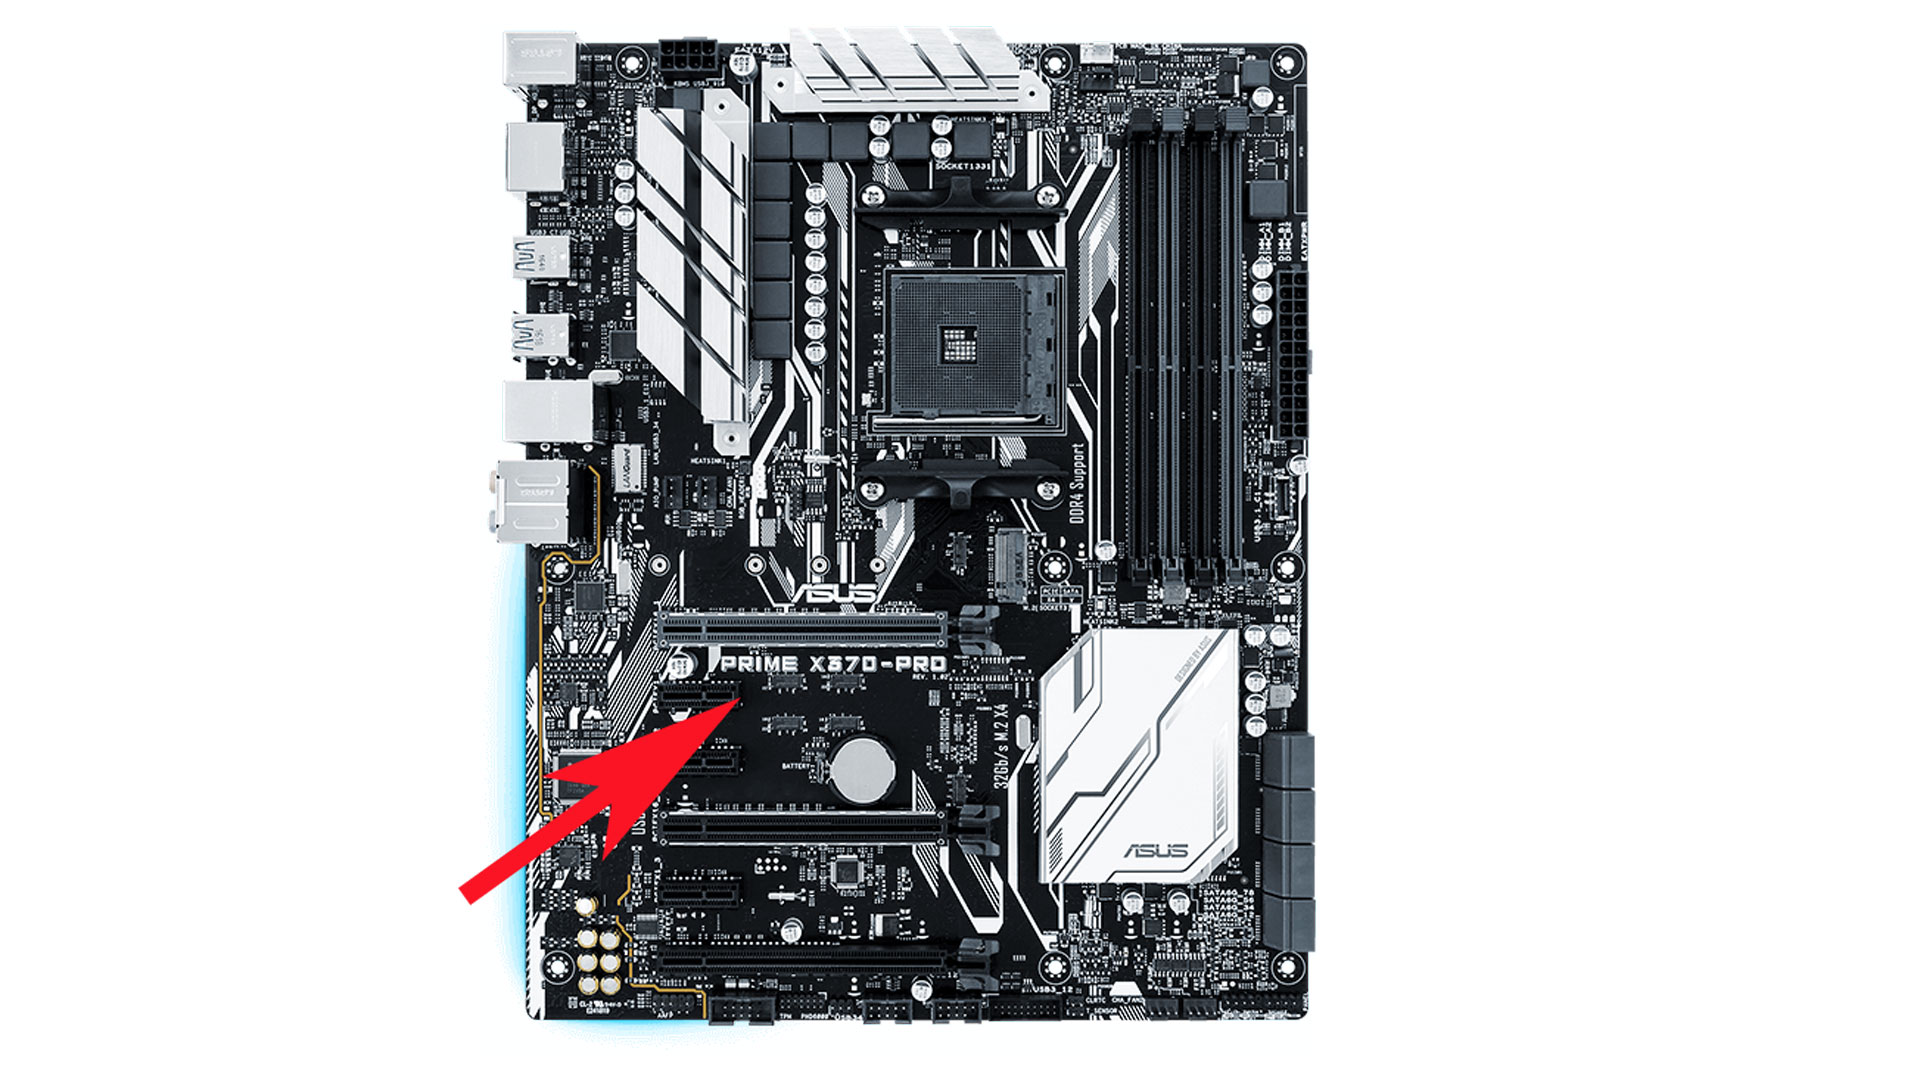 How to check your motherboard